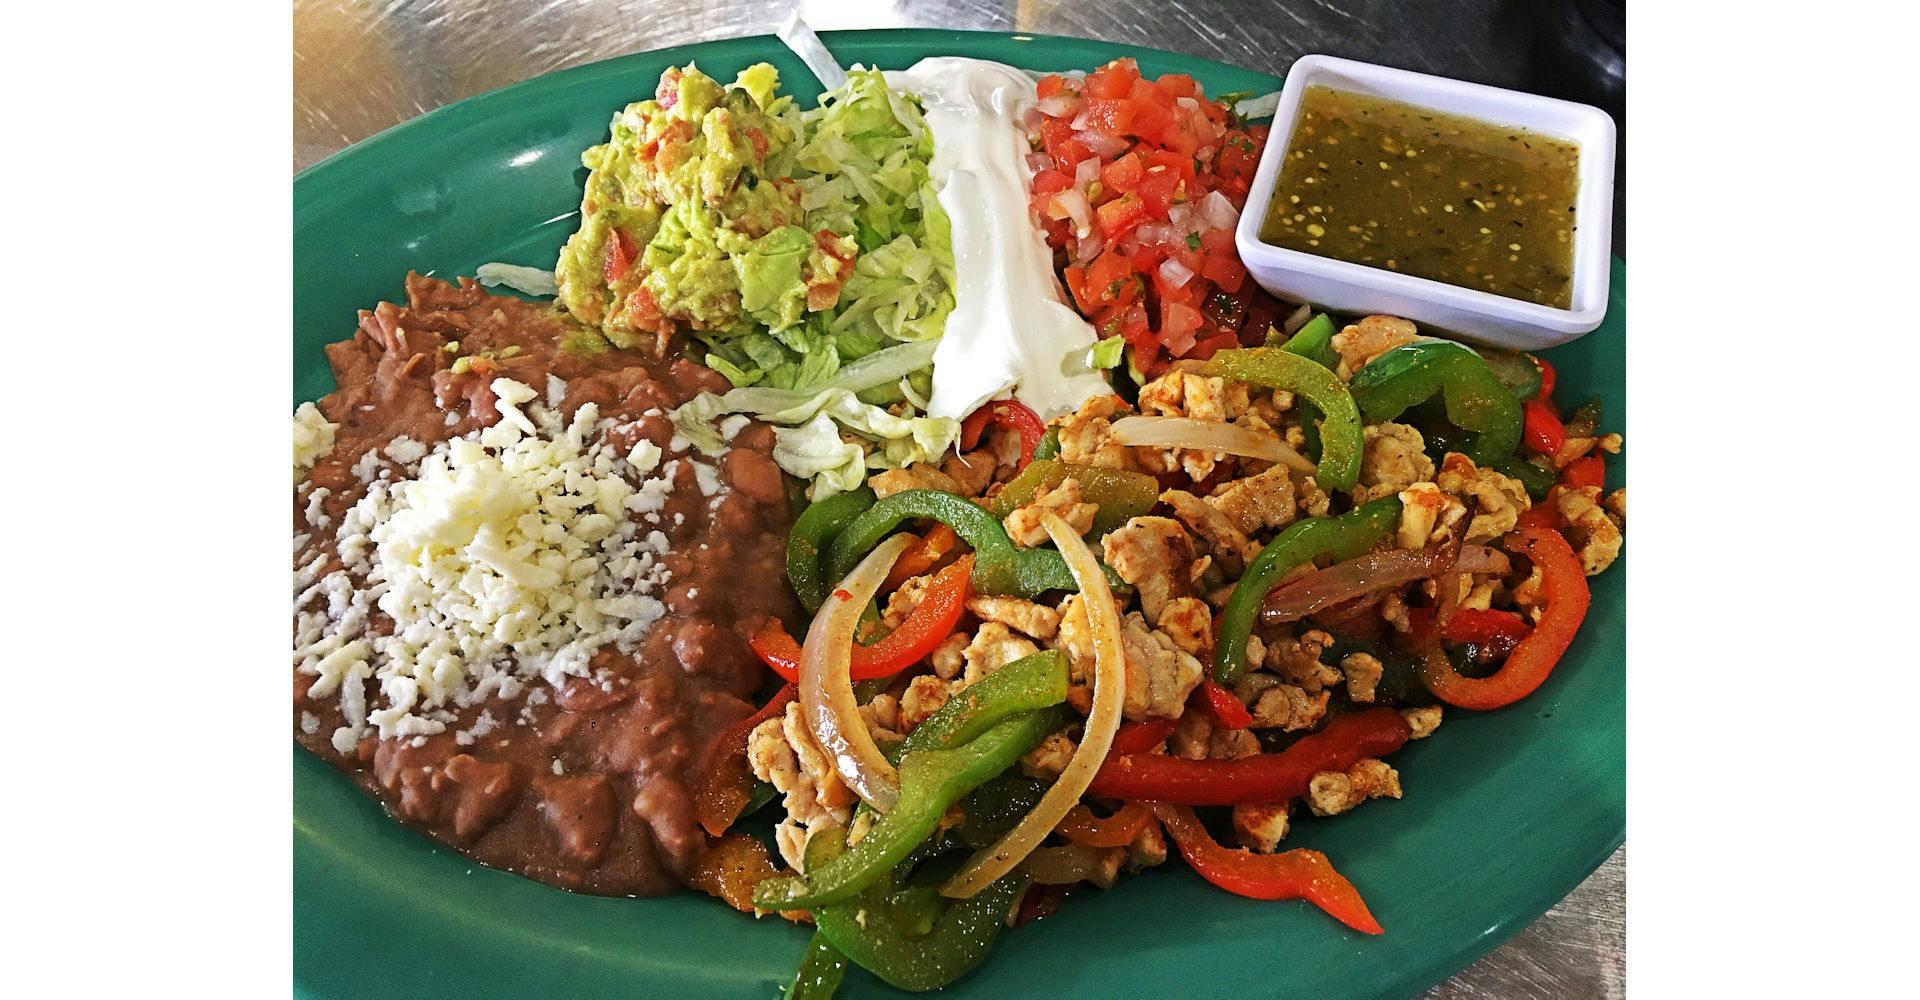 Fajitas from Silly Serrano Mexican Restaurant in Eau Claire, WI